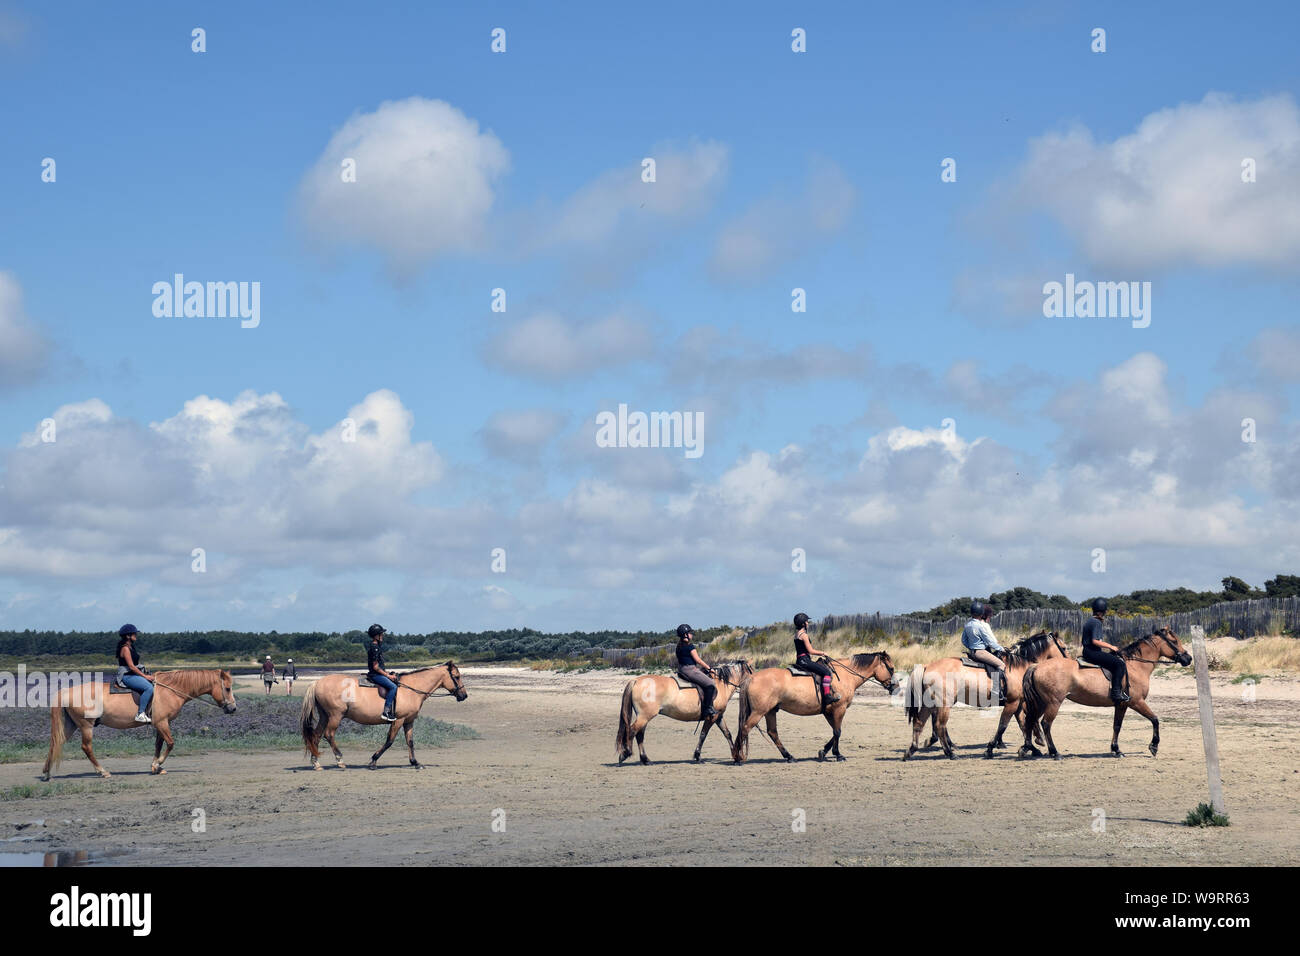 Horse riding at low tide, Le Crotoy, Somme estuary, northern France, August 2019 Stock Photo